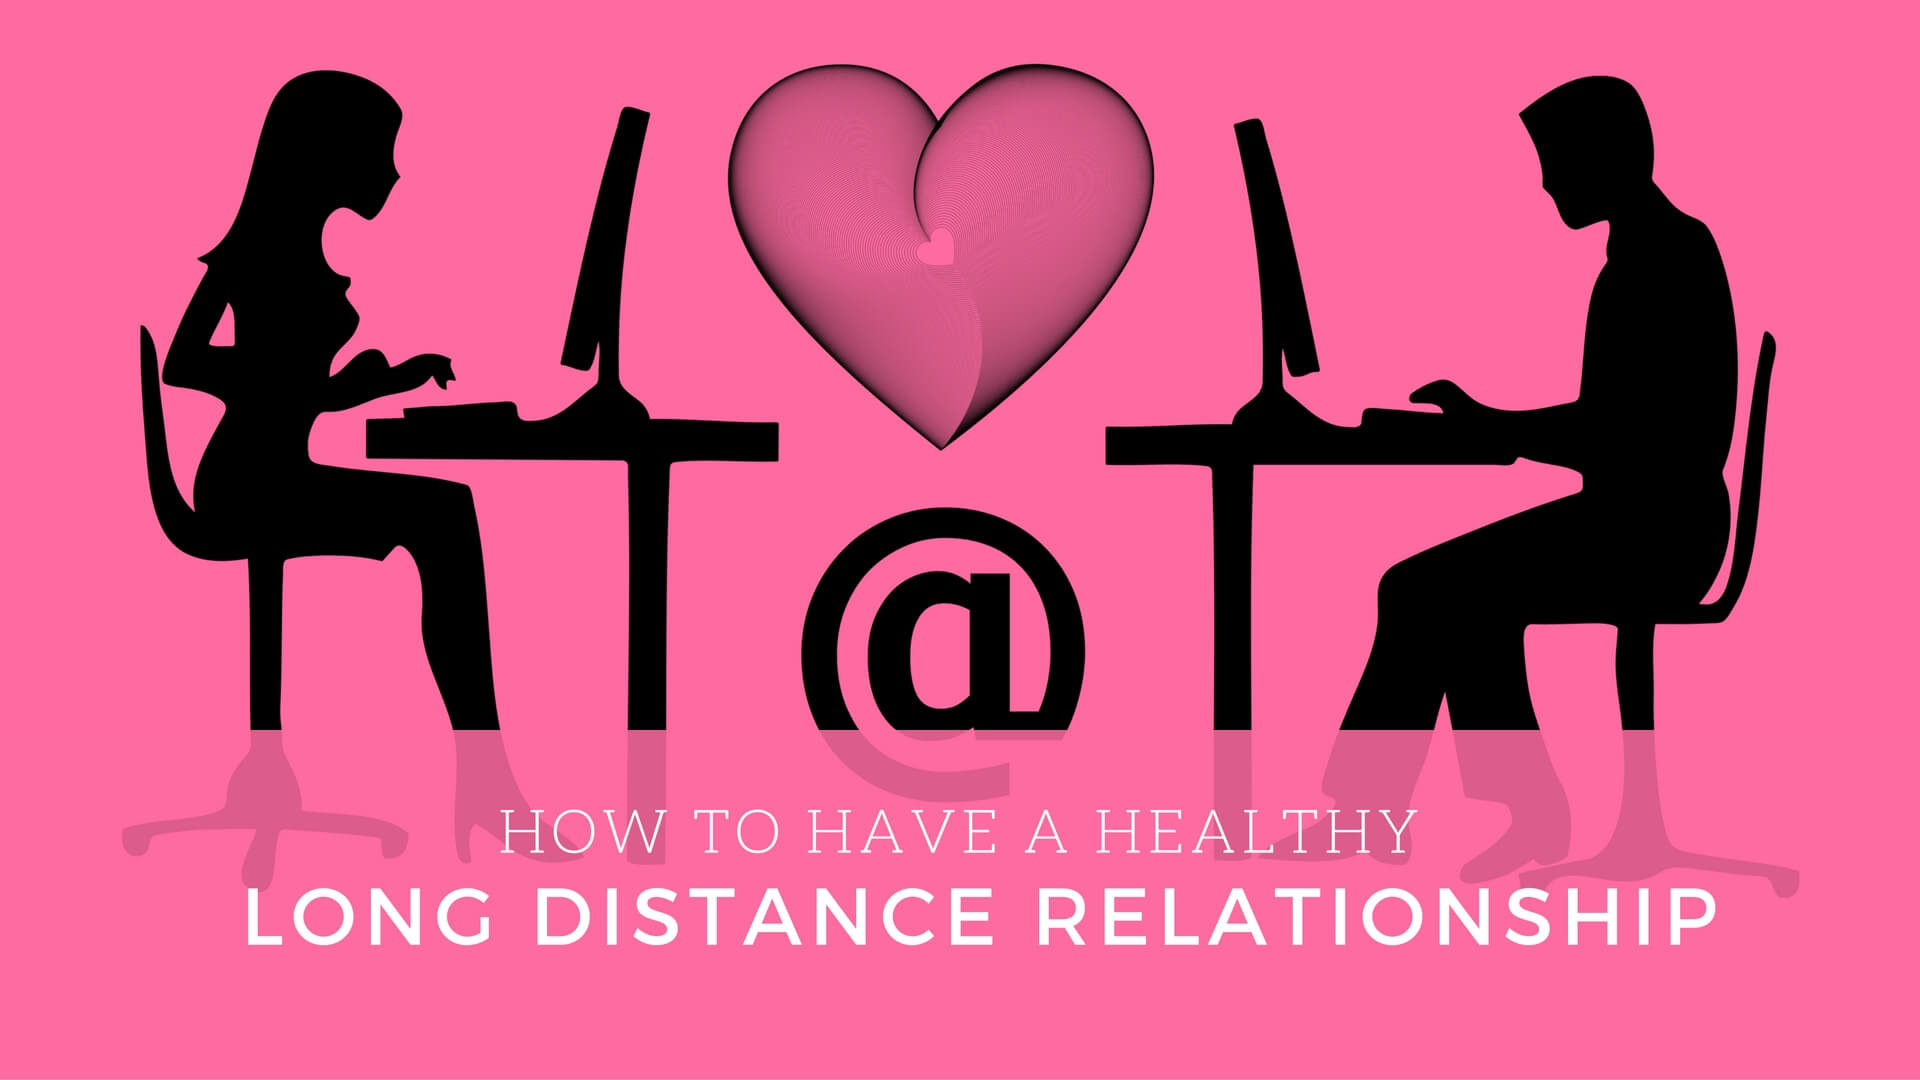 1920x1080 How to have a Healthy Long Distance Relationship